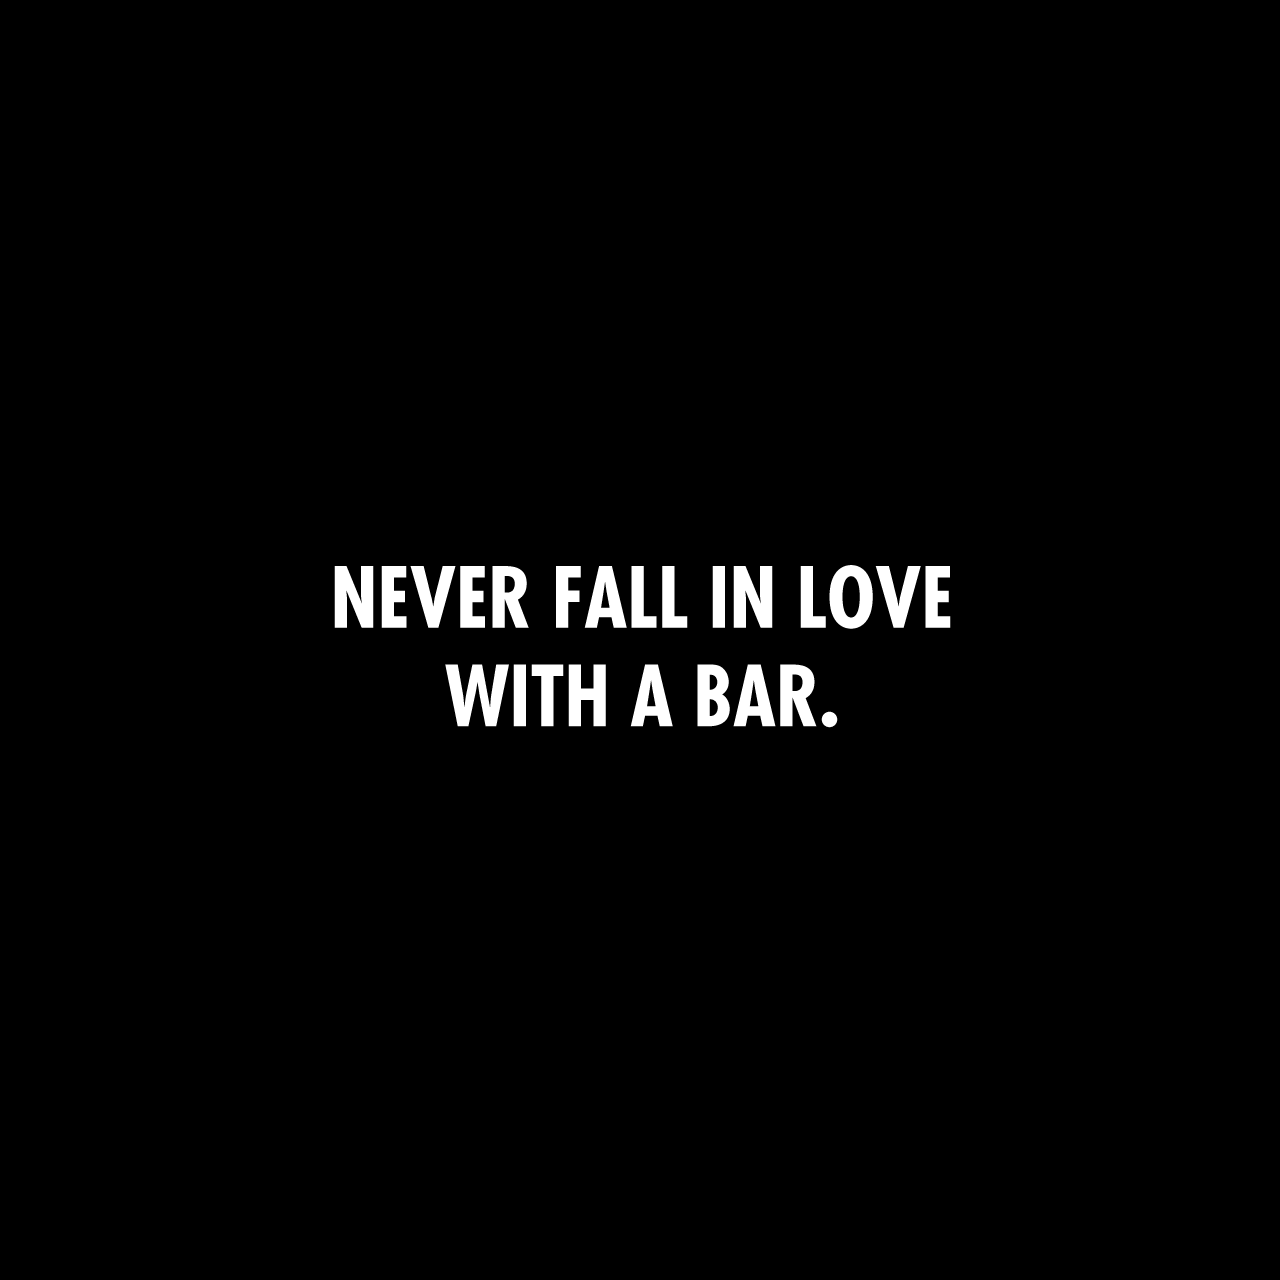 Never fall in love with a bar